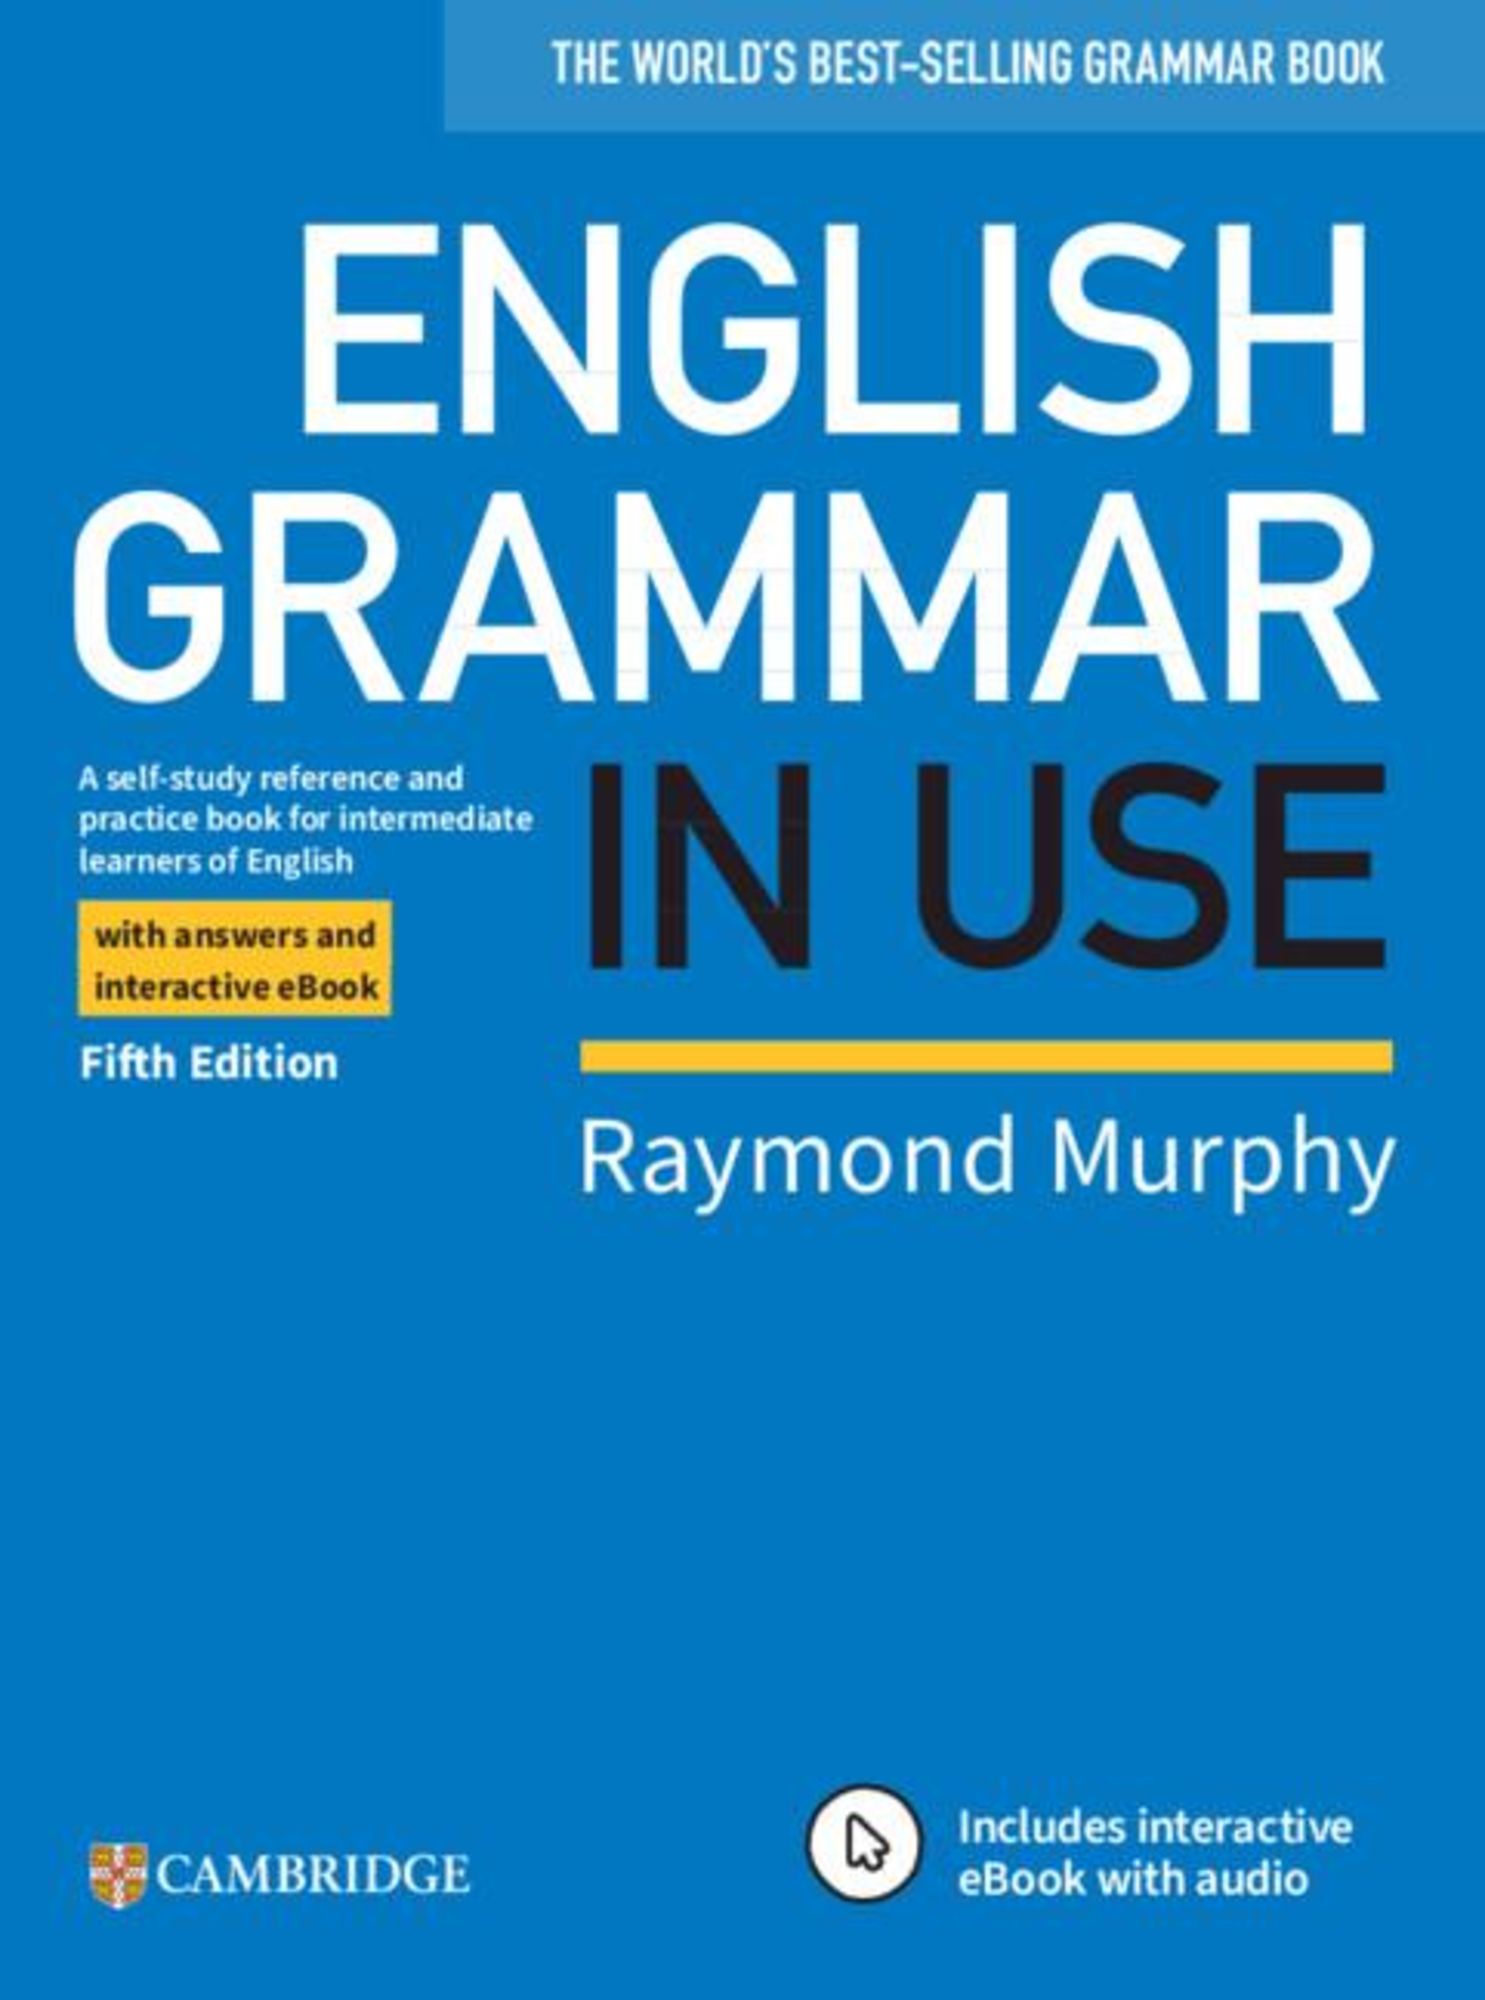 English　English'　Grammar　Self-Study　Book　Practice　Intermediate　in　Reference　'Englisch'　with　Schulbuch　Use　Book　Interactive　A　Answers　and　and　Learners　eBook:　for　of　'978-1-108-58662-7'